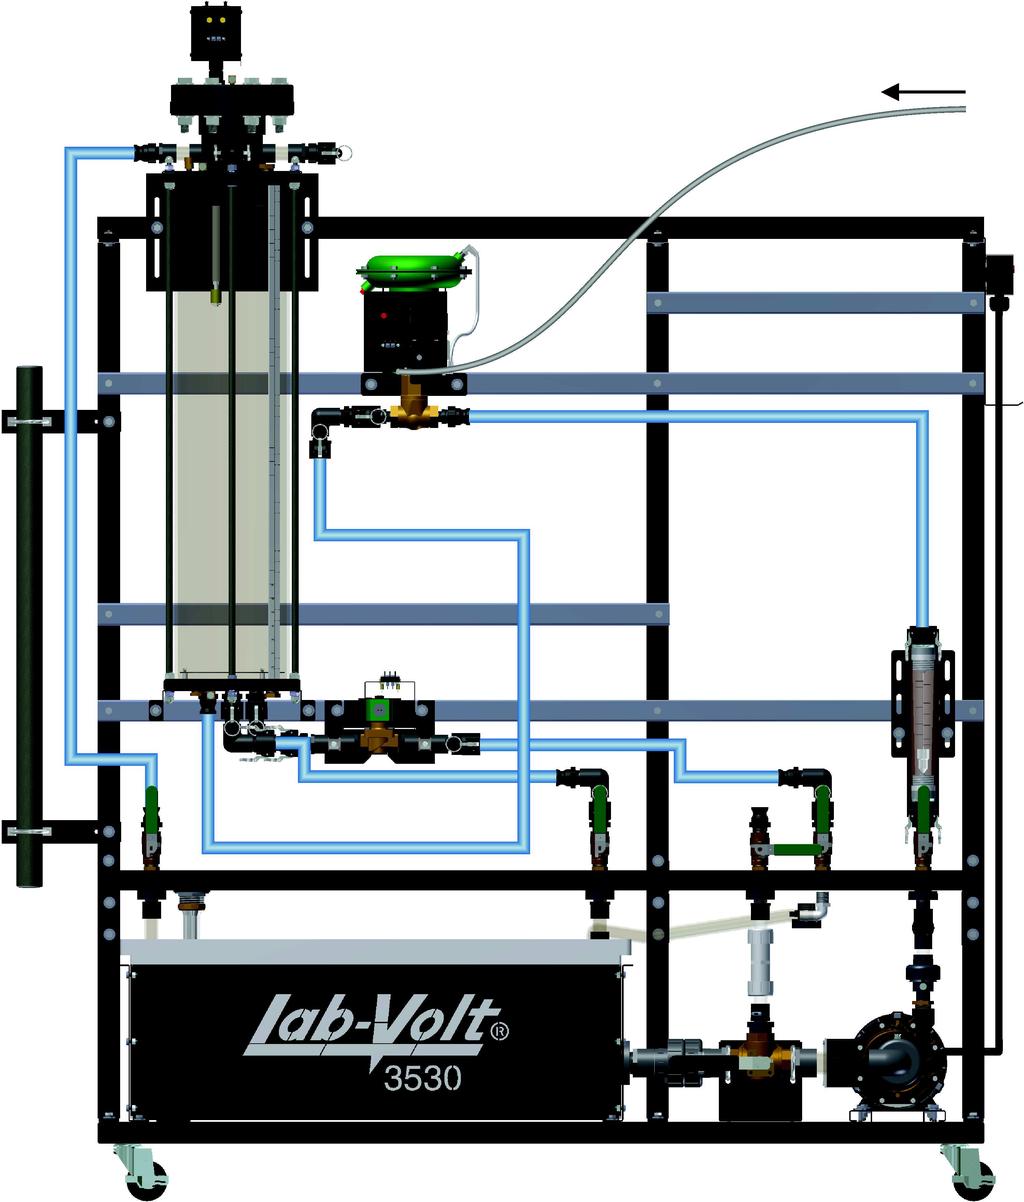 Exercise 2 Float Switch Procedure Air from the pneumatic unit (140 kpa (20 psi)) Figure 17. Setup. 2. In this exercise, the float switch is used to open the solenoid valve to provide additional drainage to the column if the level of water is too high.